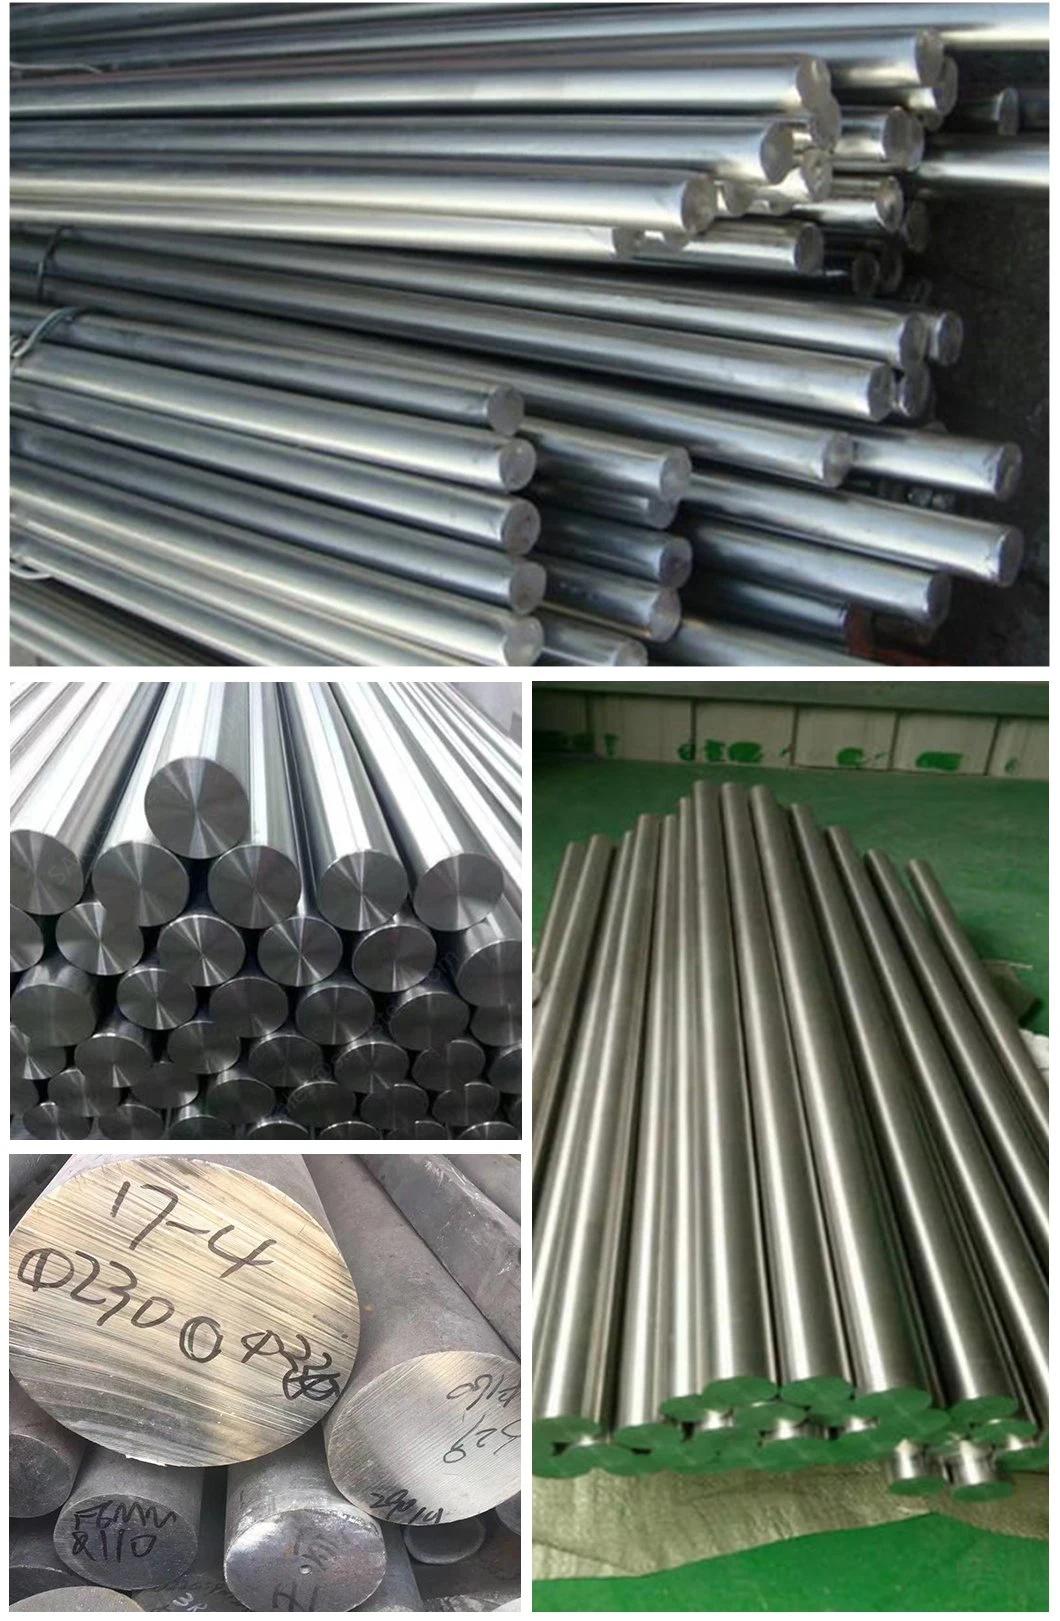 Round Bright Rod Prime Quality Hexagon 625 630 17-4pH 17-7pH 631 632 660 718 800 800h 800ht 825 840 890 890L 901 903 Stainless Steel Bar with Good Service